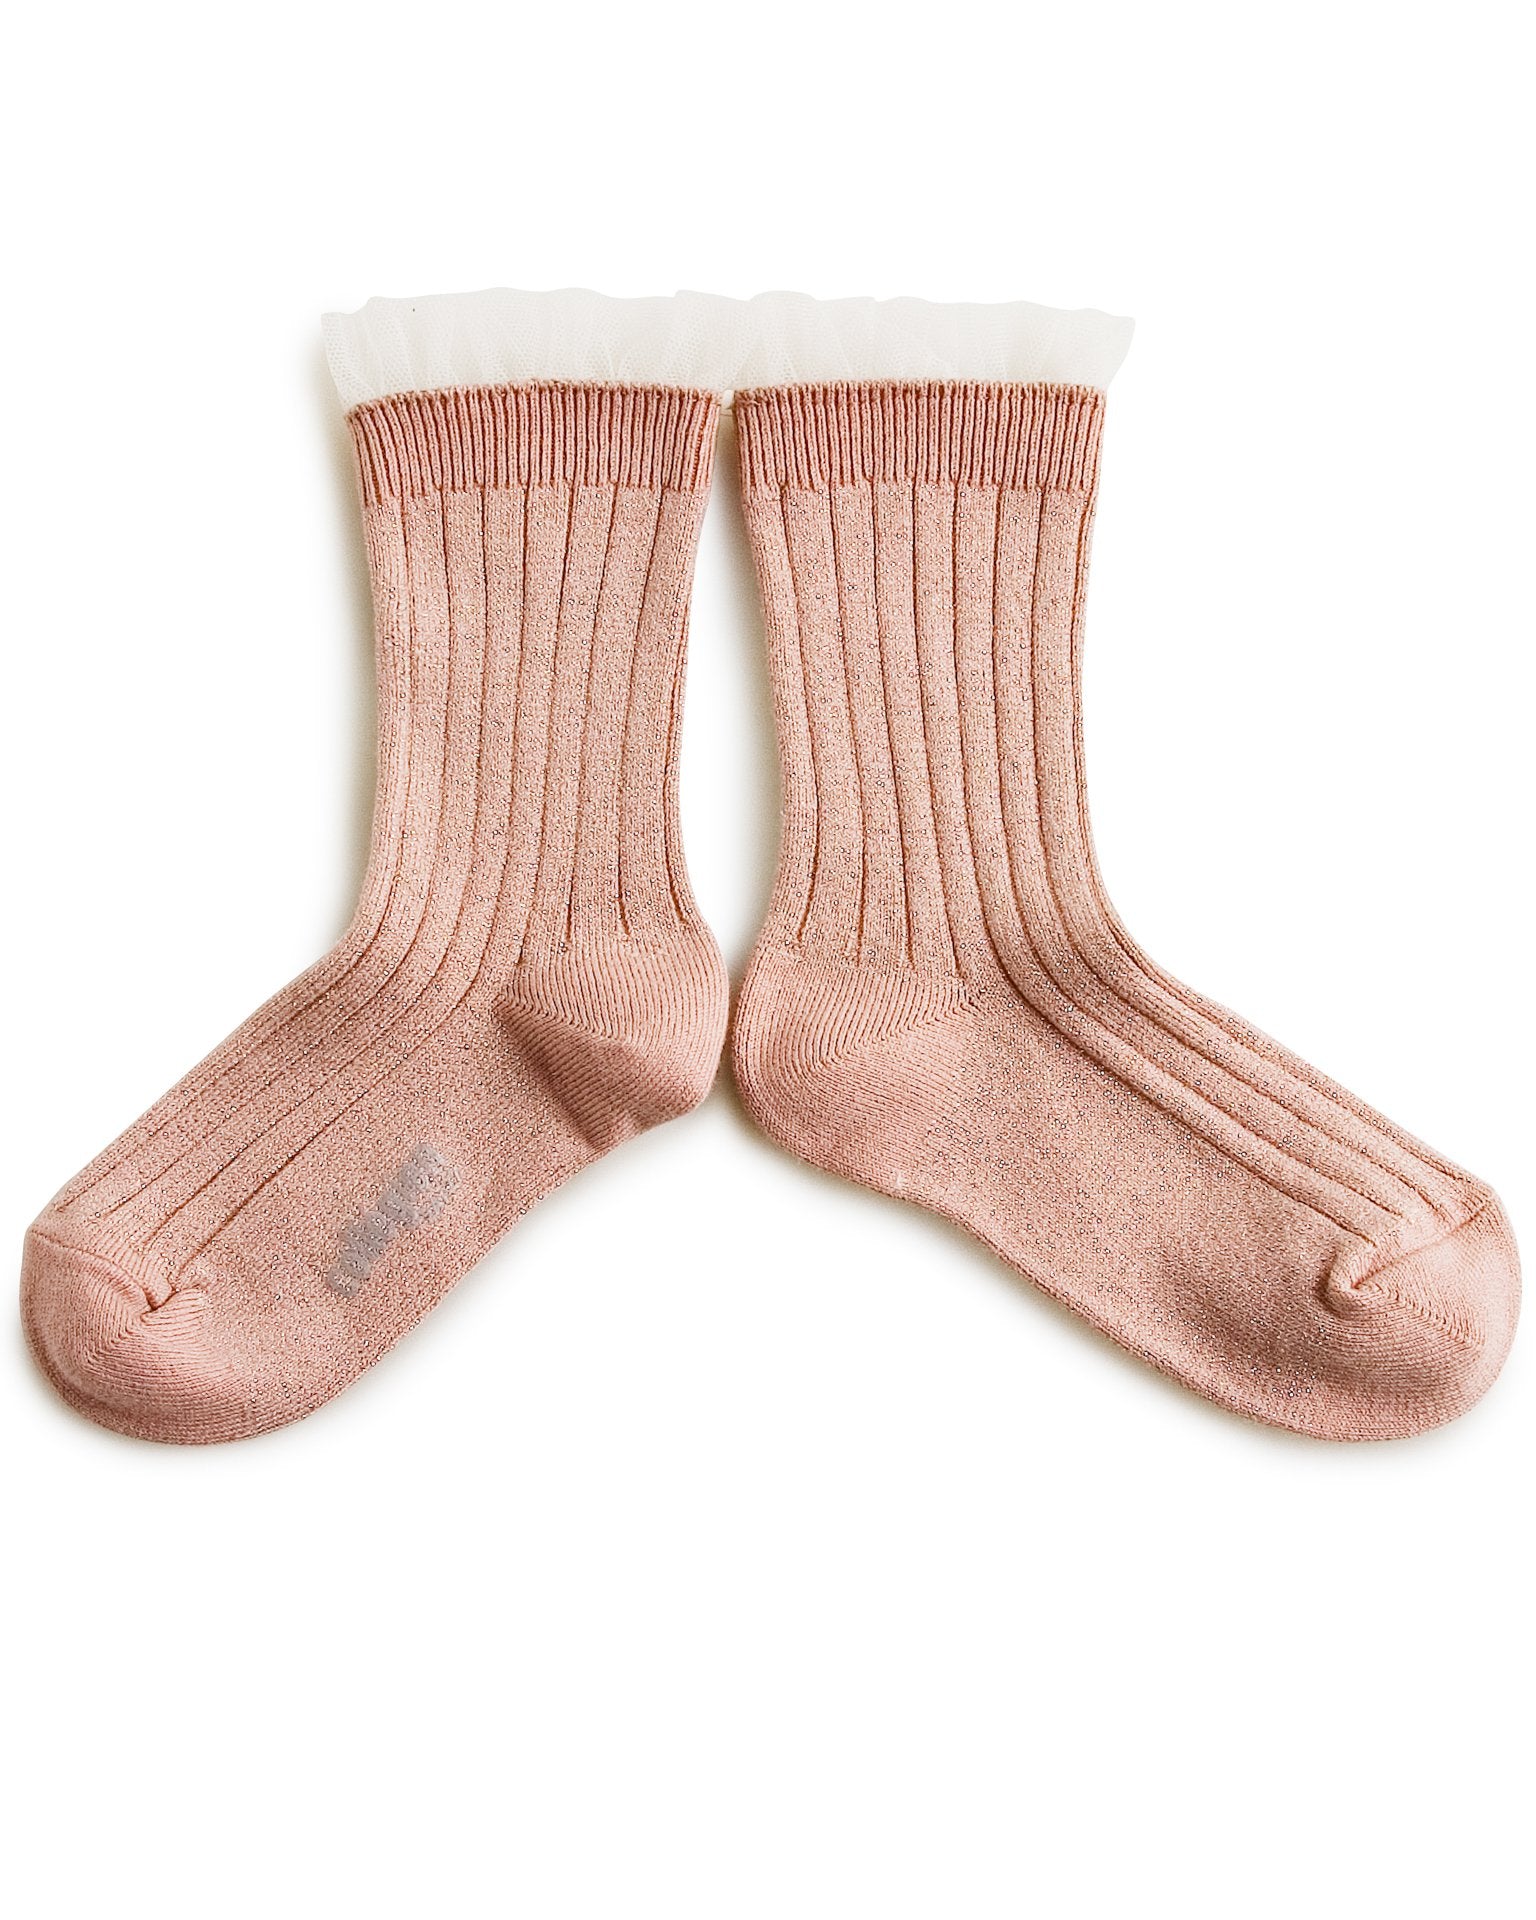 Little collegien accessories glittery tulle socks in vieux rose